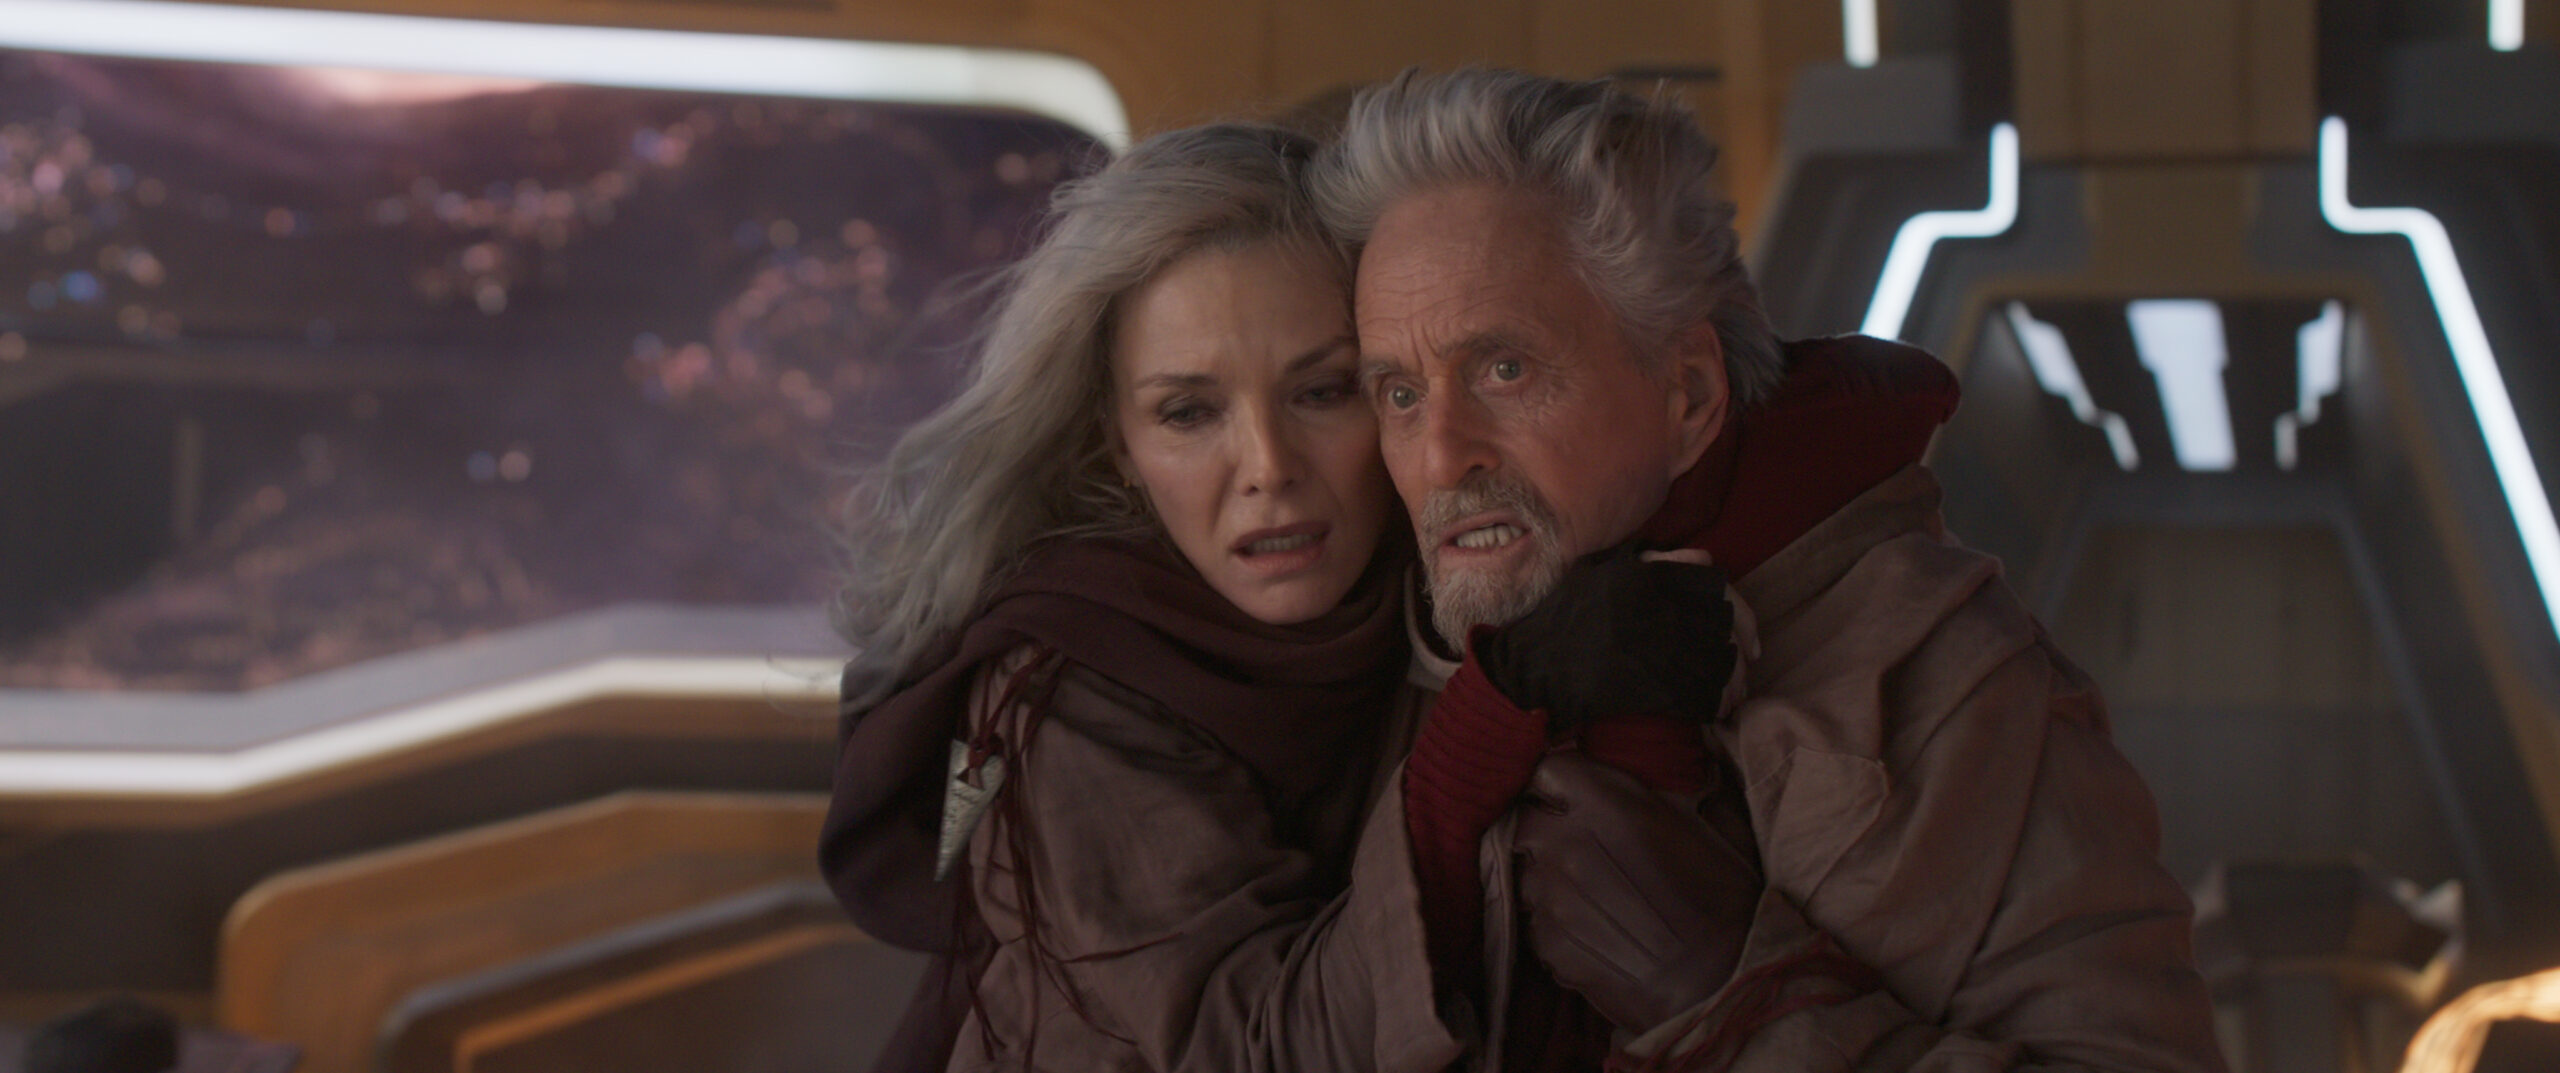 Veteran actor Michael Douglas says he wanted Hank Pym to die in Quantumania and doubts he'll be back for a fourth movie.